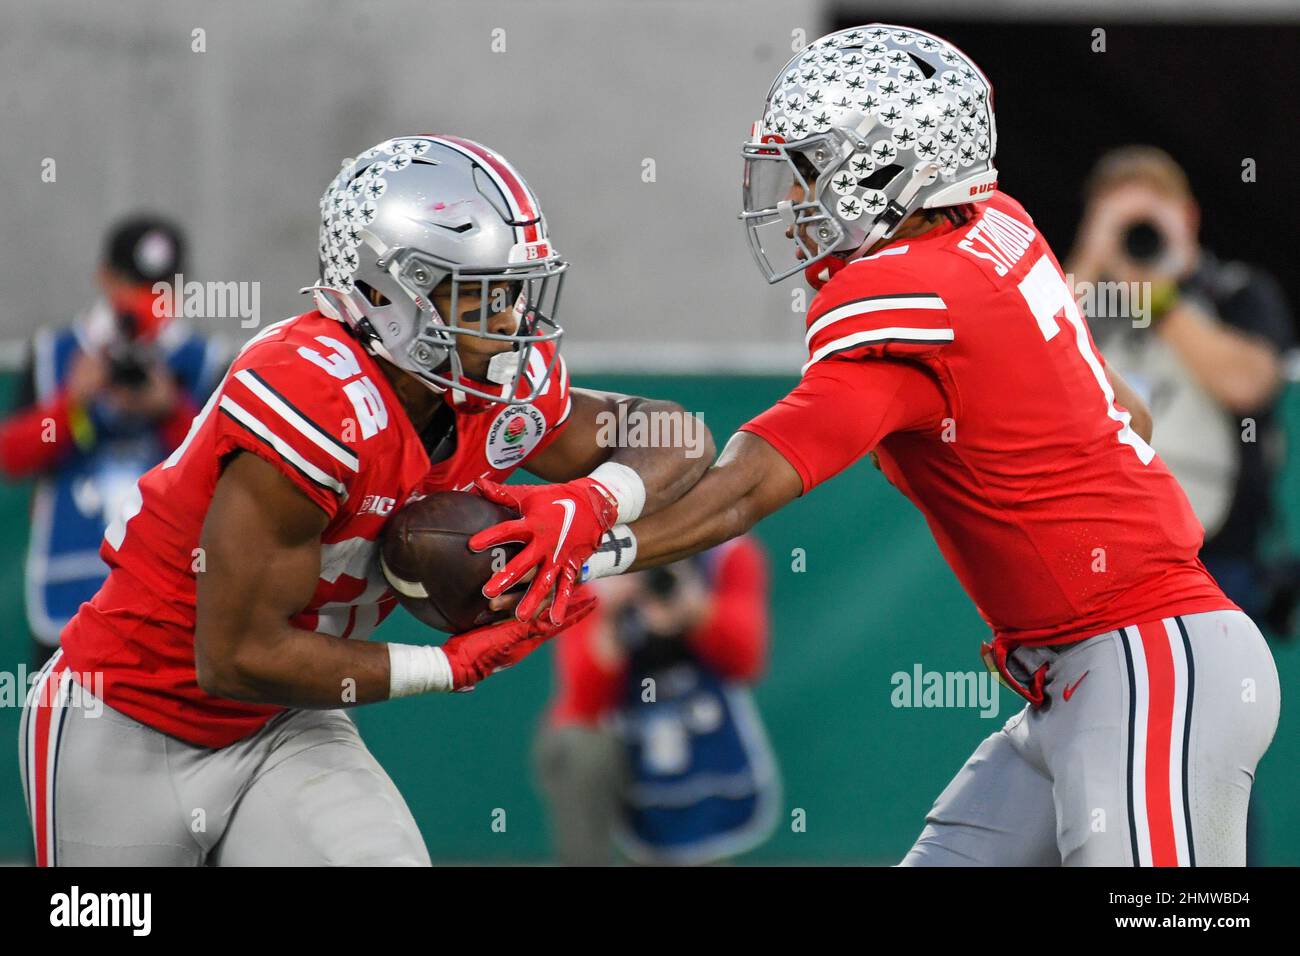 Ohio State Buckeyes quarterback C.J. Stroud (7) hands the ball to running back TreVeyon Henderson (32) during the Rose Bowl game against the Utah Utes Stock Photo